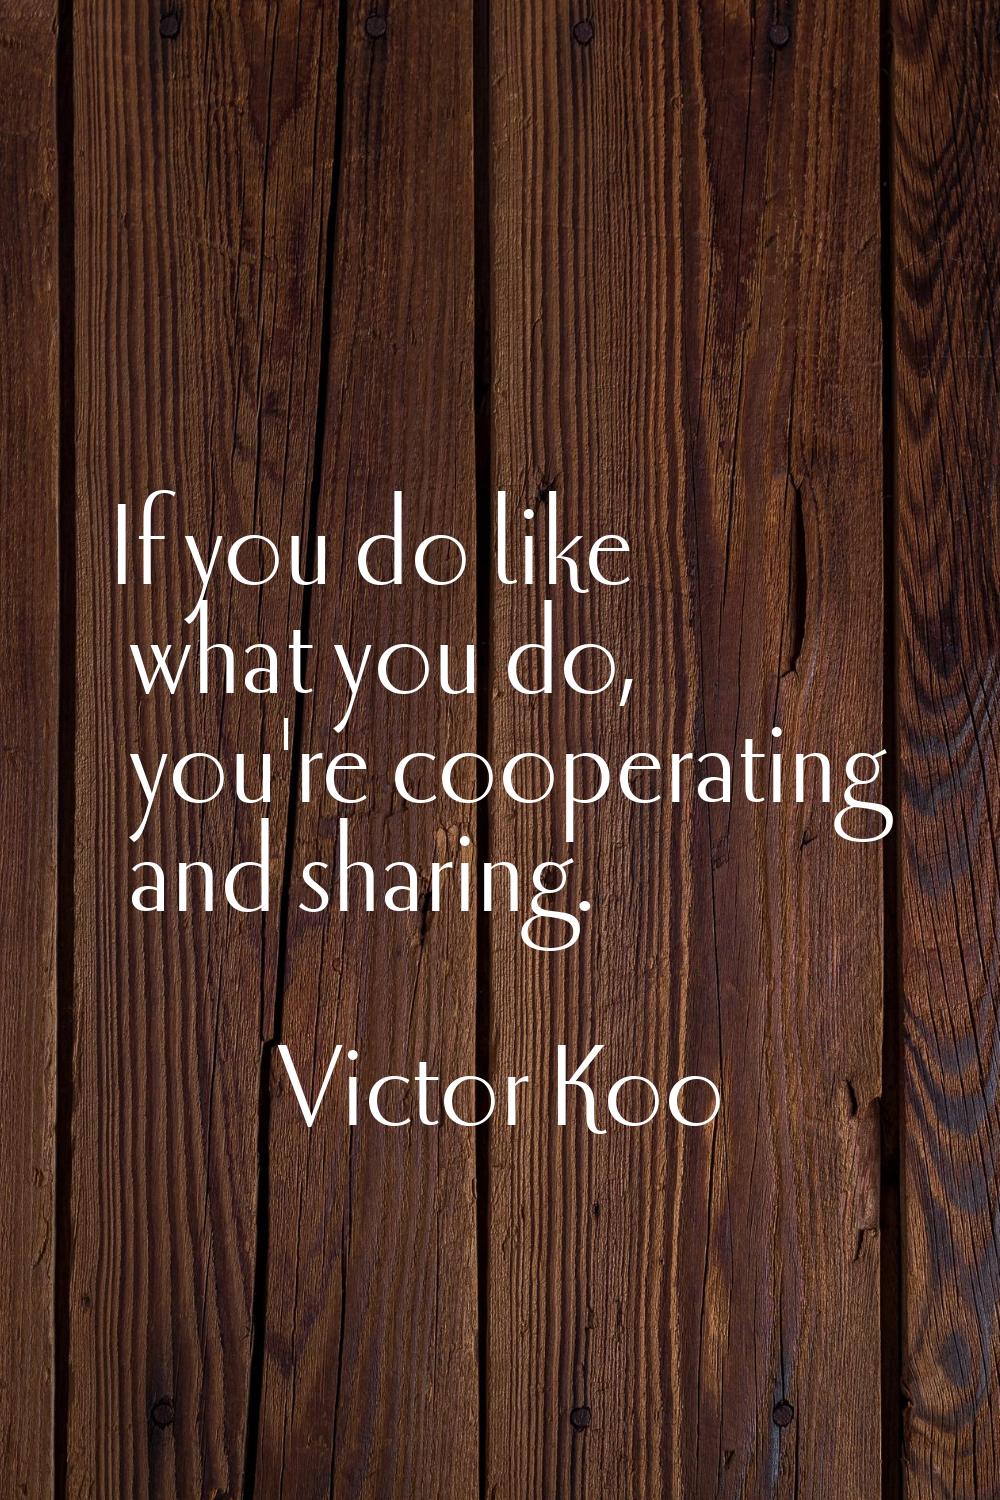 If you do like what you do, you're cooperating and sharing.